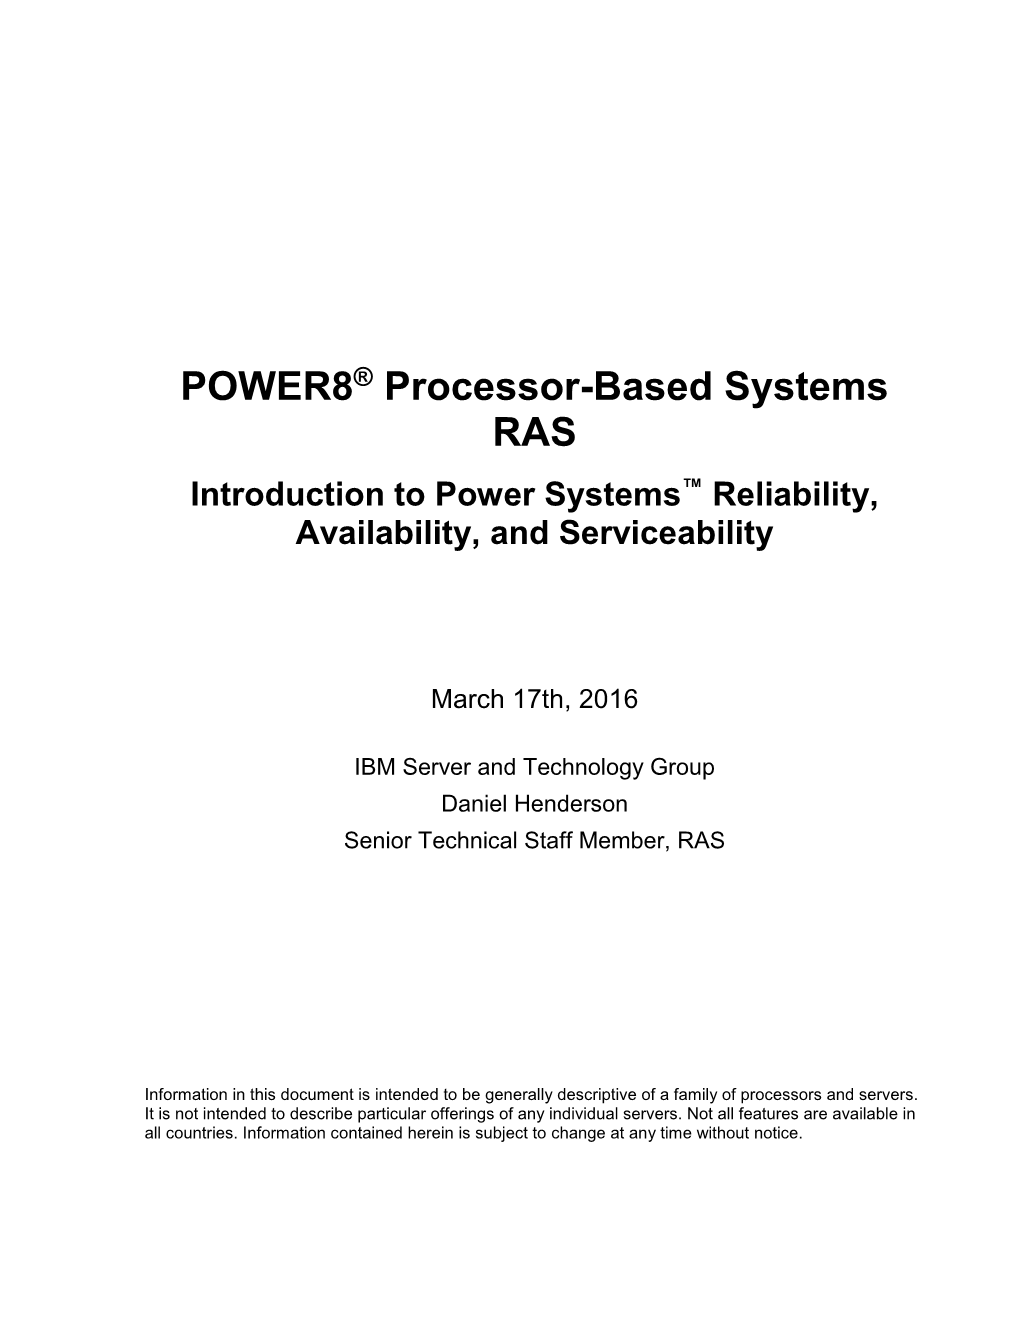 POWER8® Processor-Based Systems RAS Introduction to Power Systems™ Reliability, Availability, and Serviceability